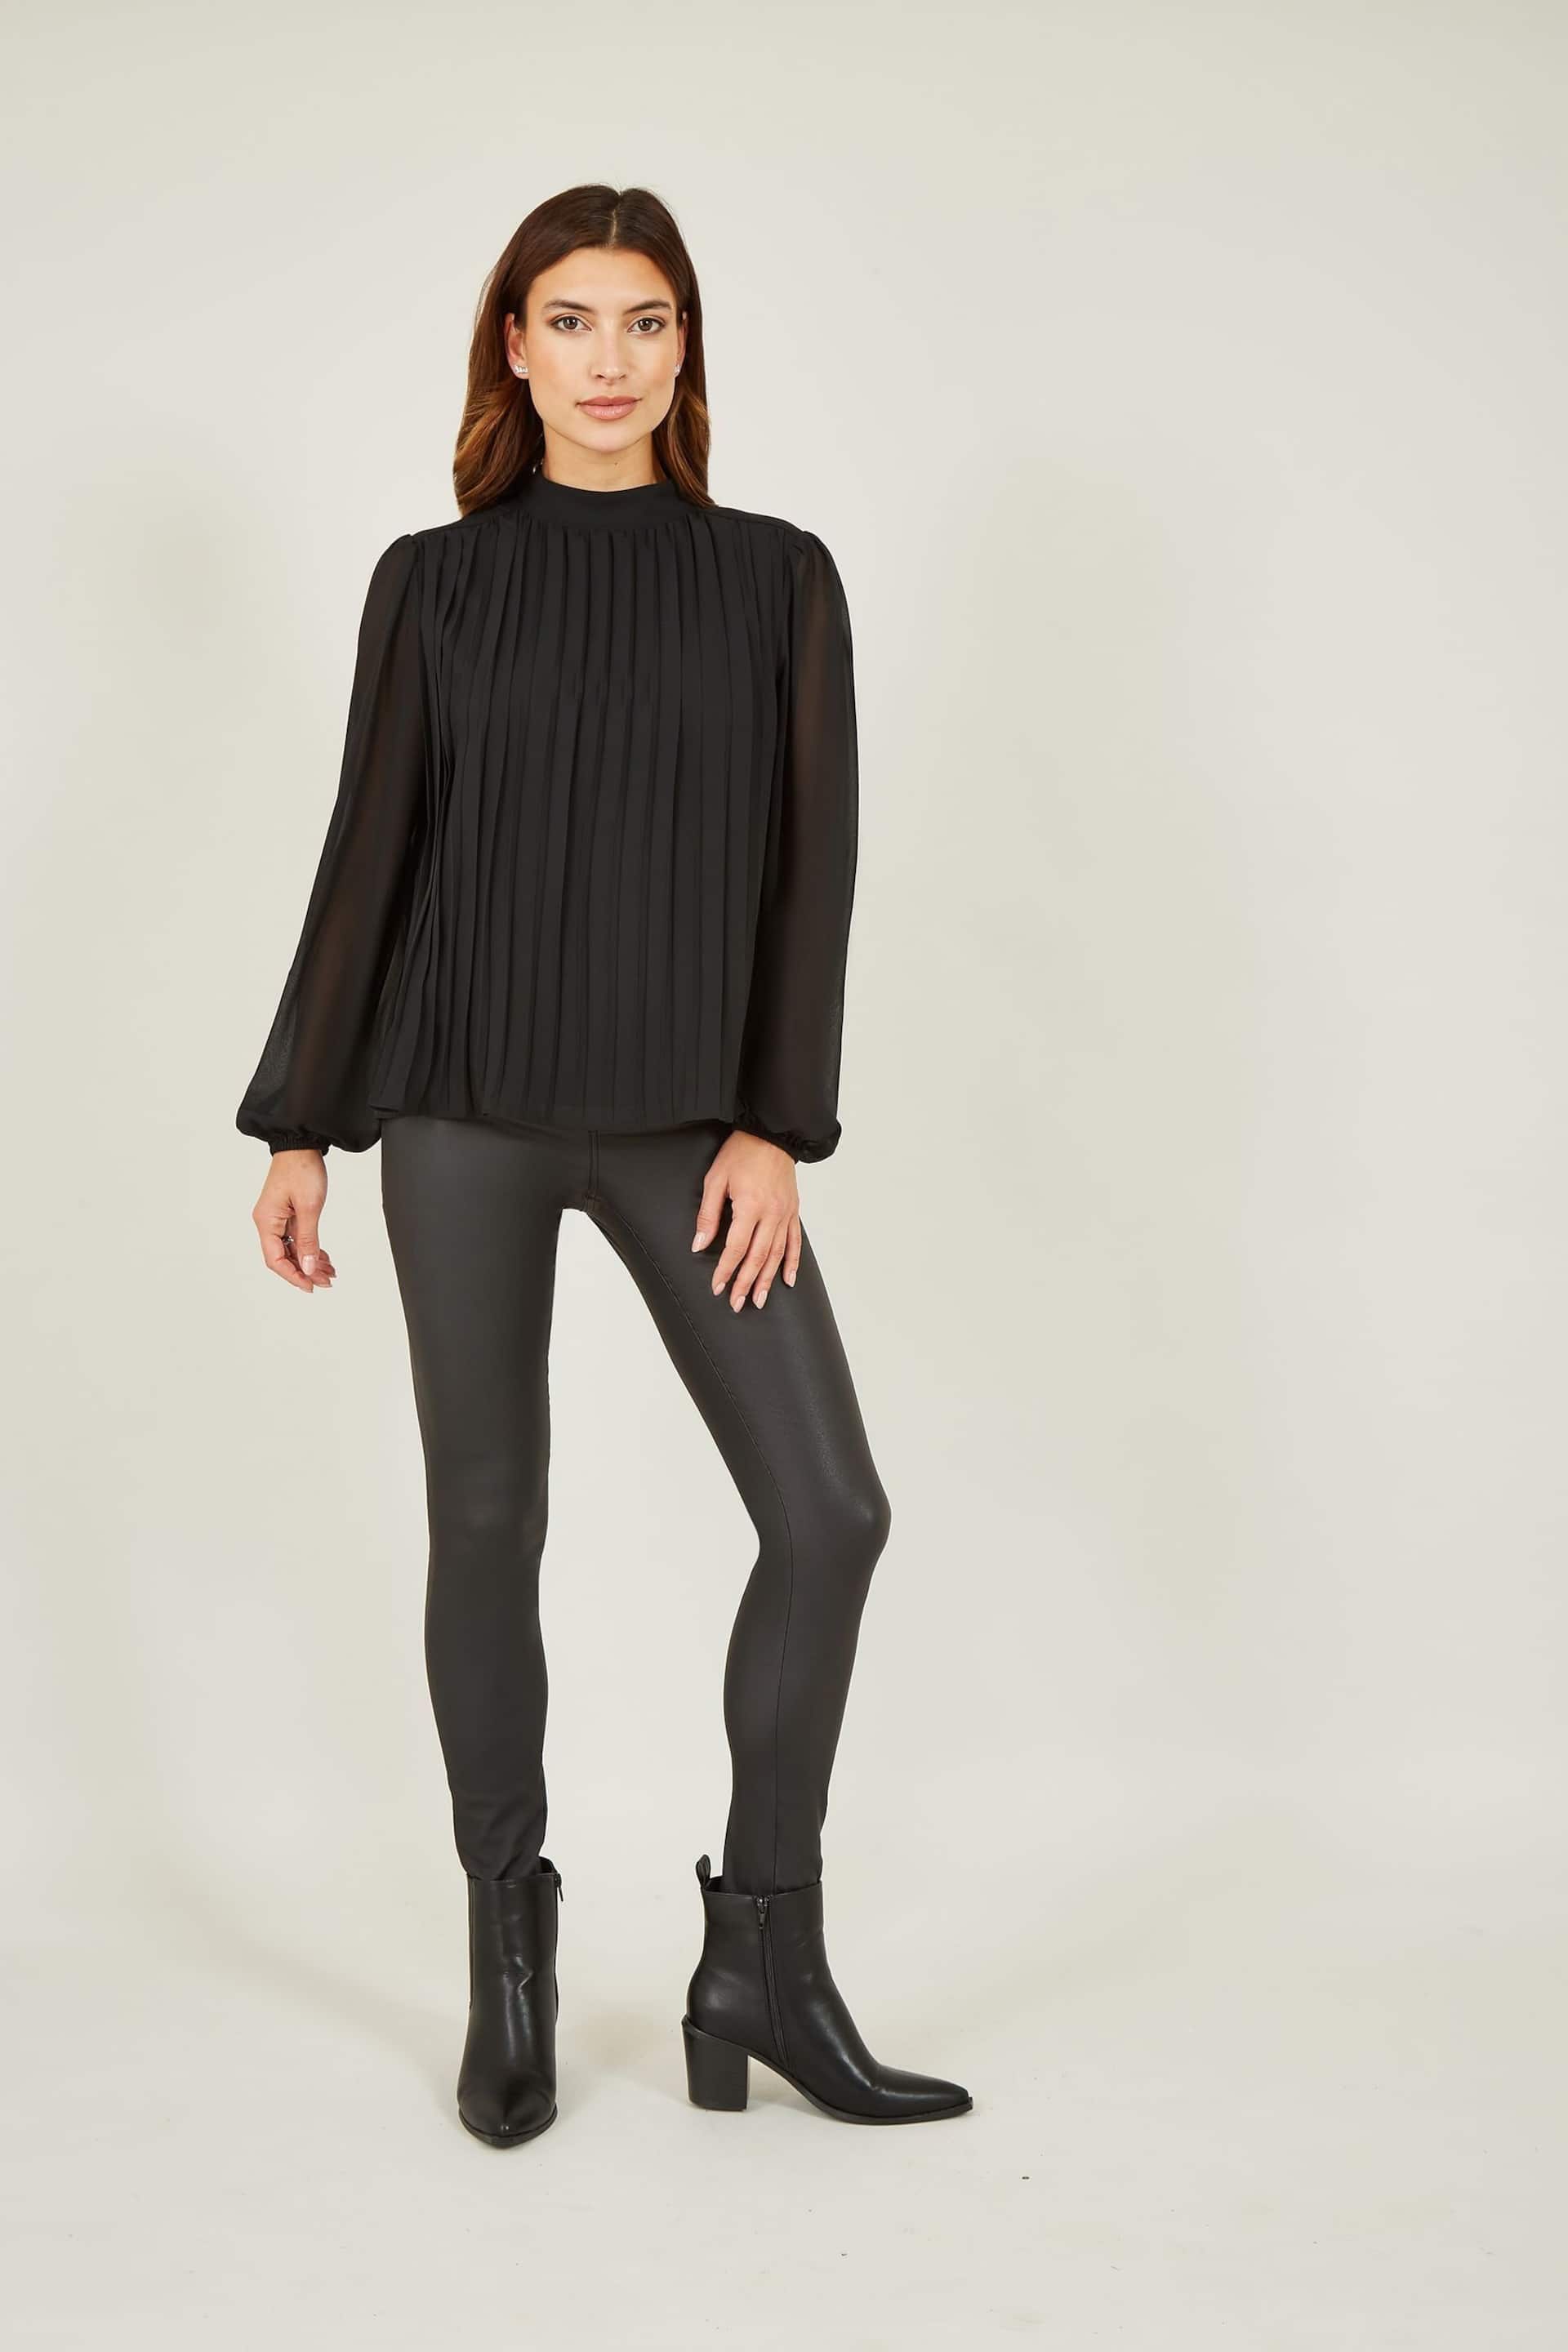 Mela Black Pleated Long Sleeve Top With High Neck - Image 2 of 4